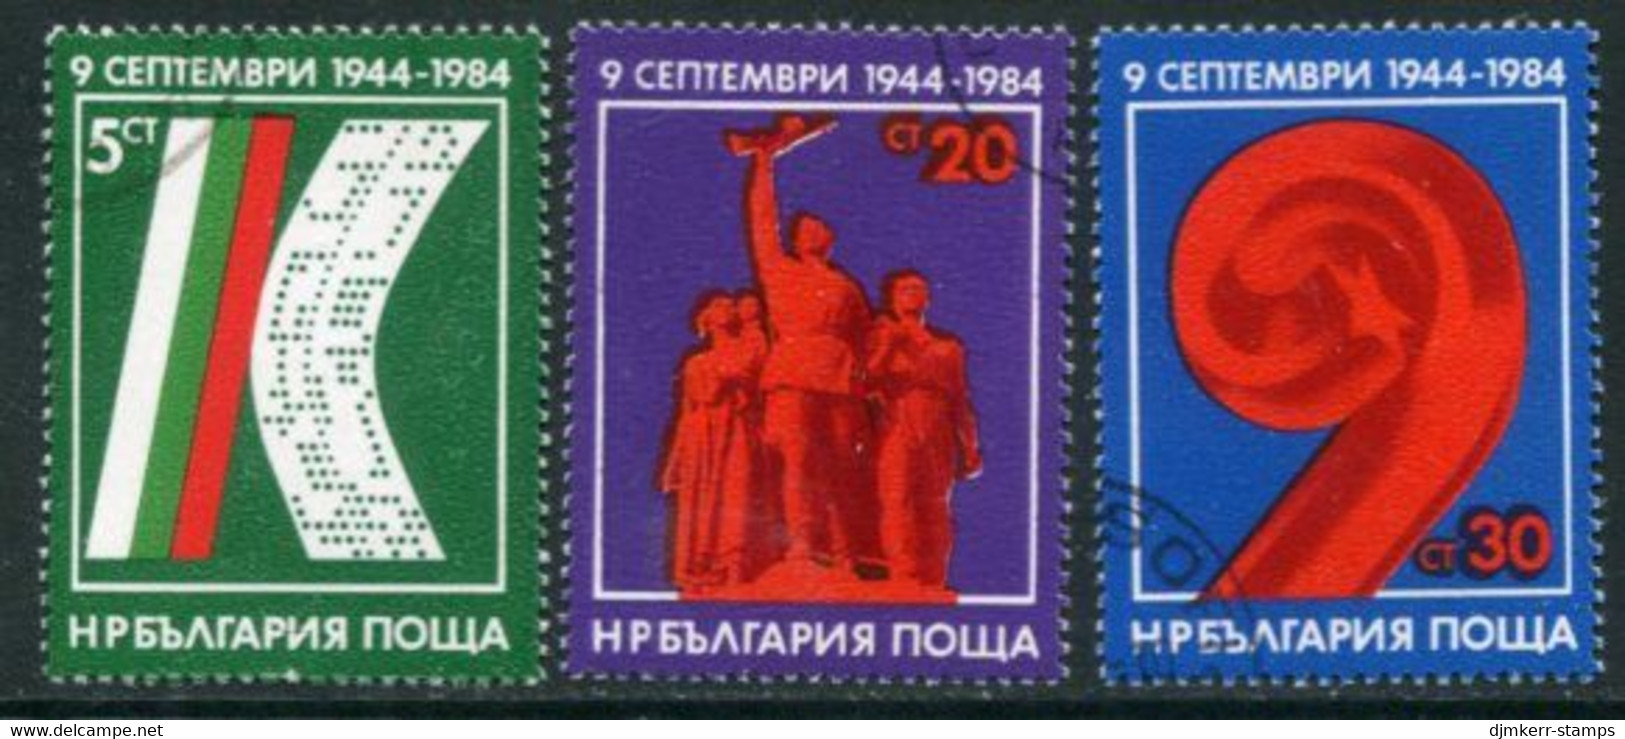 BULGARIA 1984 People's Republic  Used.  Michel 3283-85 - Used Stamps